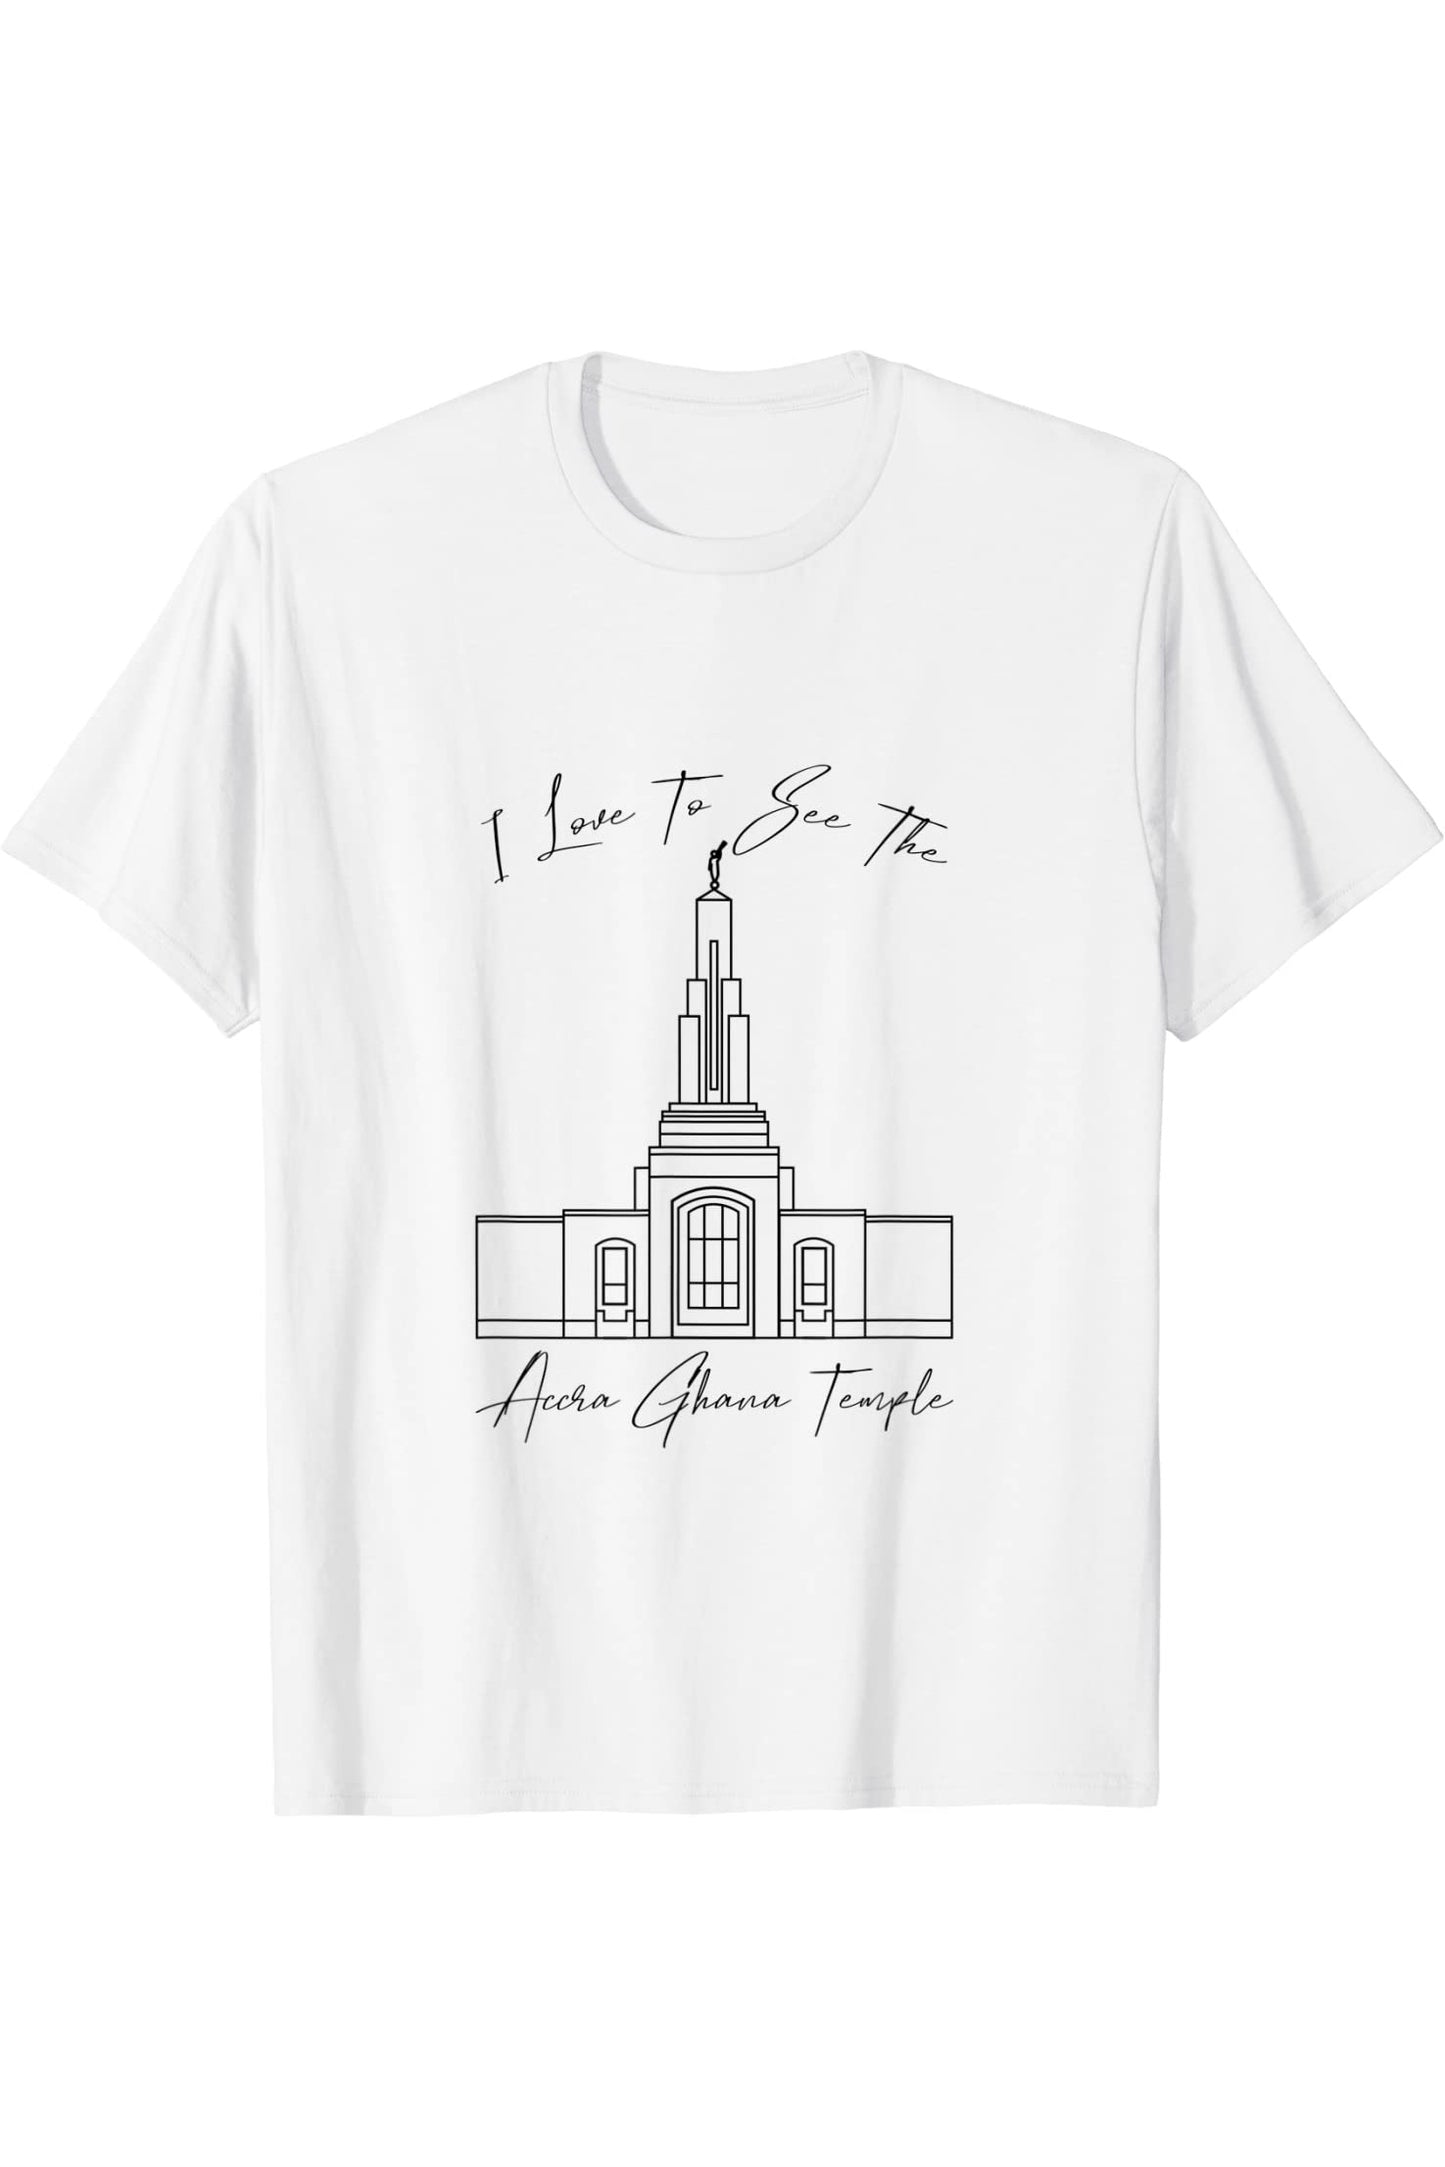 Accra Ghana Temple T-Shirt - Calligraphy Style (English) US